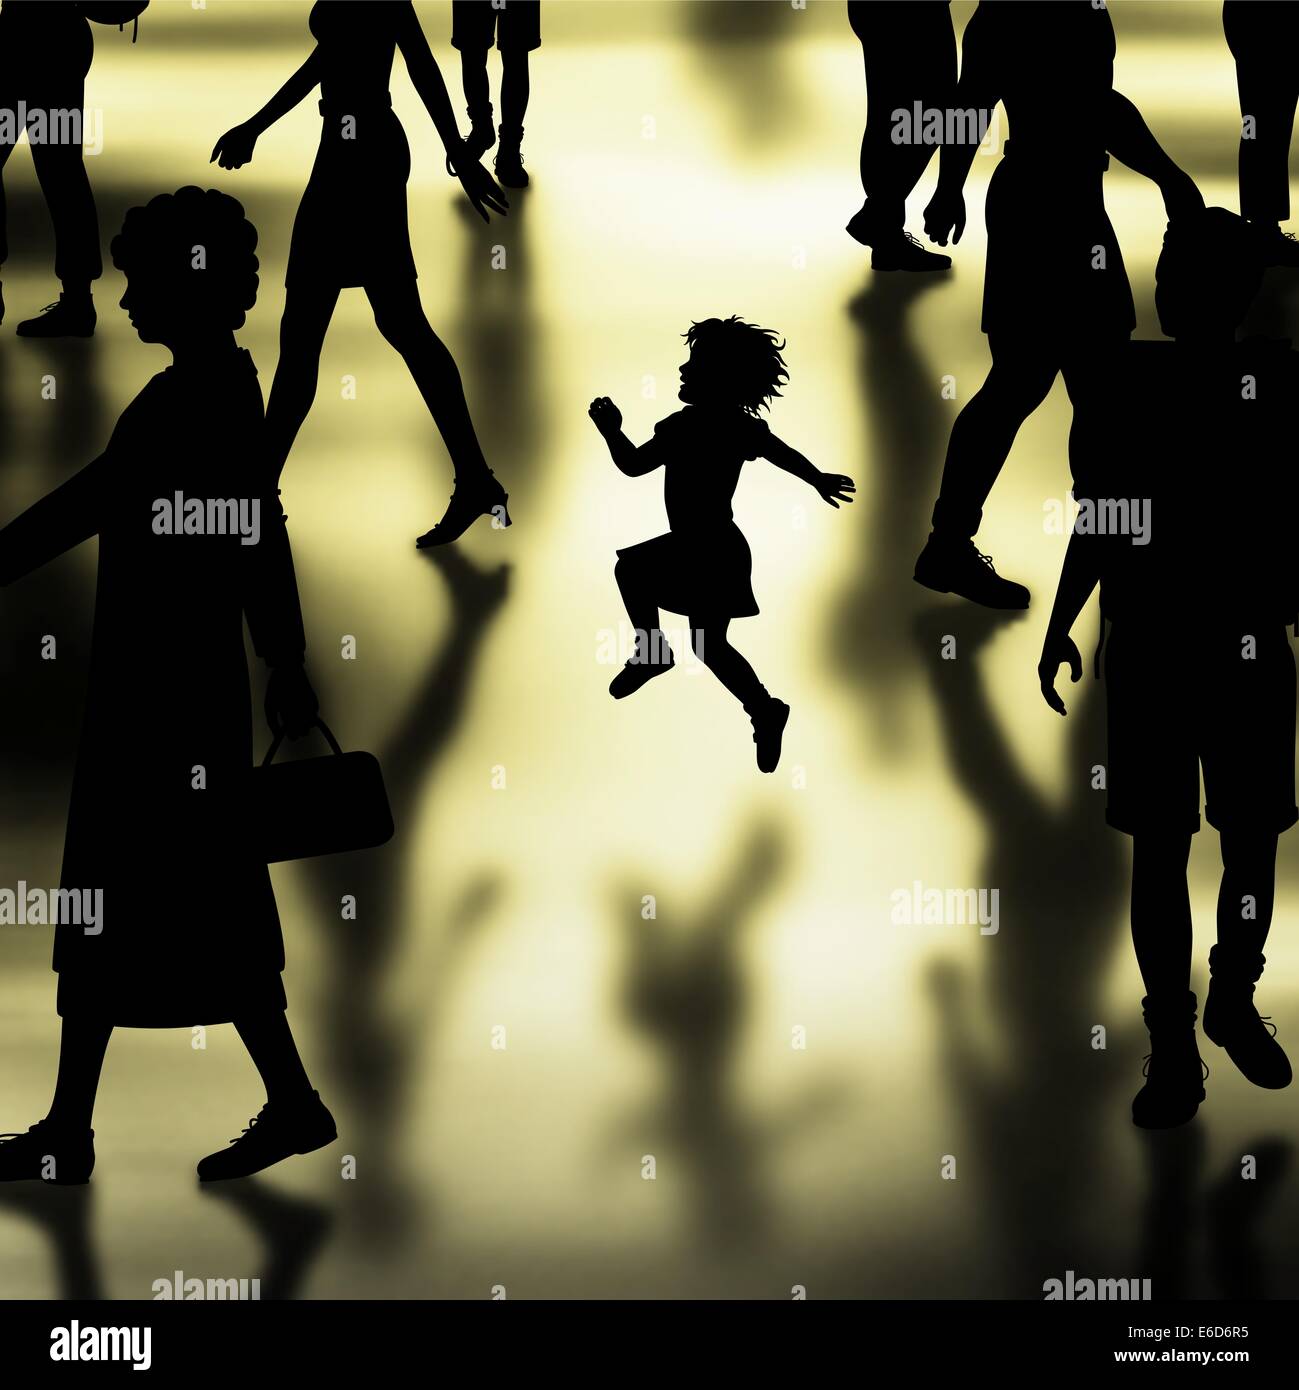 Editable vector silhouette of a young girl skipping in a crowded hall made using a gradient mesh Stock Vector